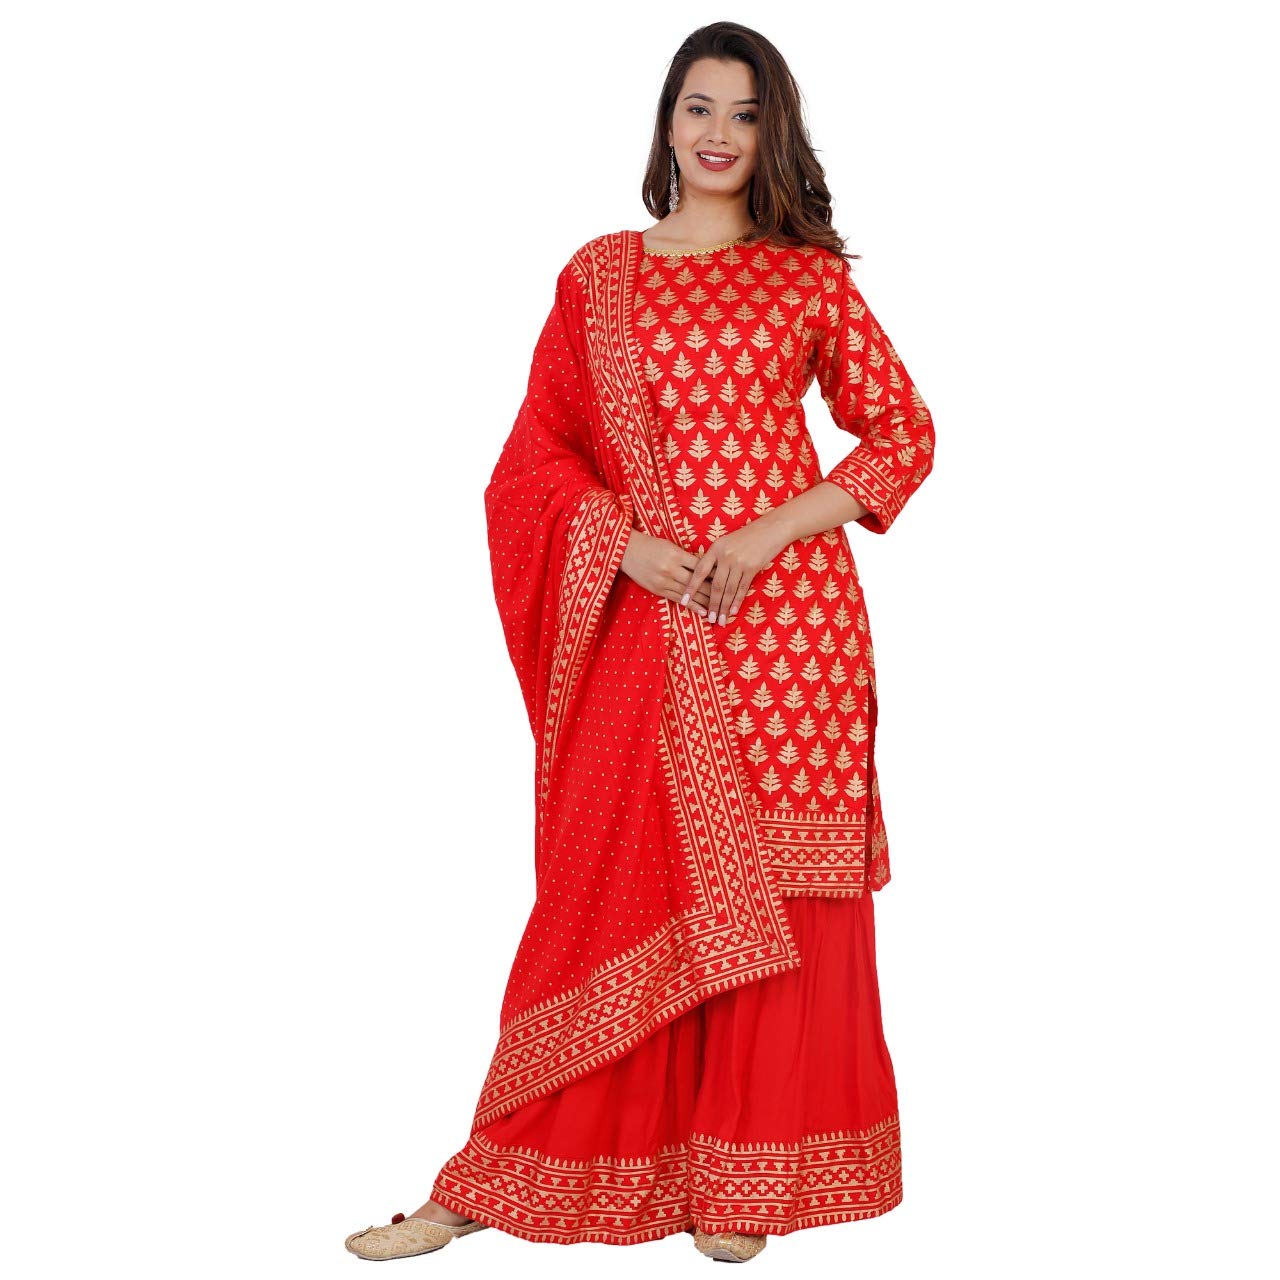 Keep Cart Gold Print A Line Kurti with Gota Work on Neck and Gold Print on Sharara with Heavy Rayon Printed Full Length Dupatta Salwar Suit Set for Women. -  Kurtas & Kurtis in Sri Lanka from Arcade Online Shopping - Just Rs. 6099!